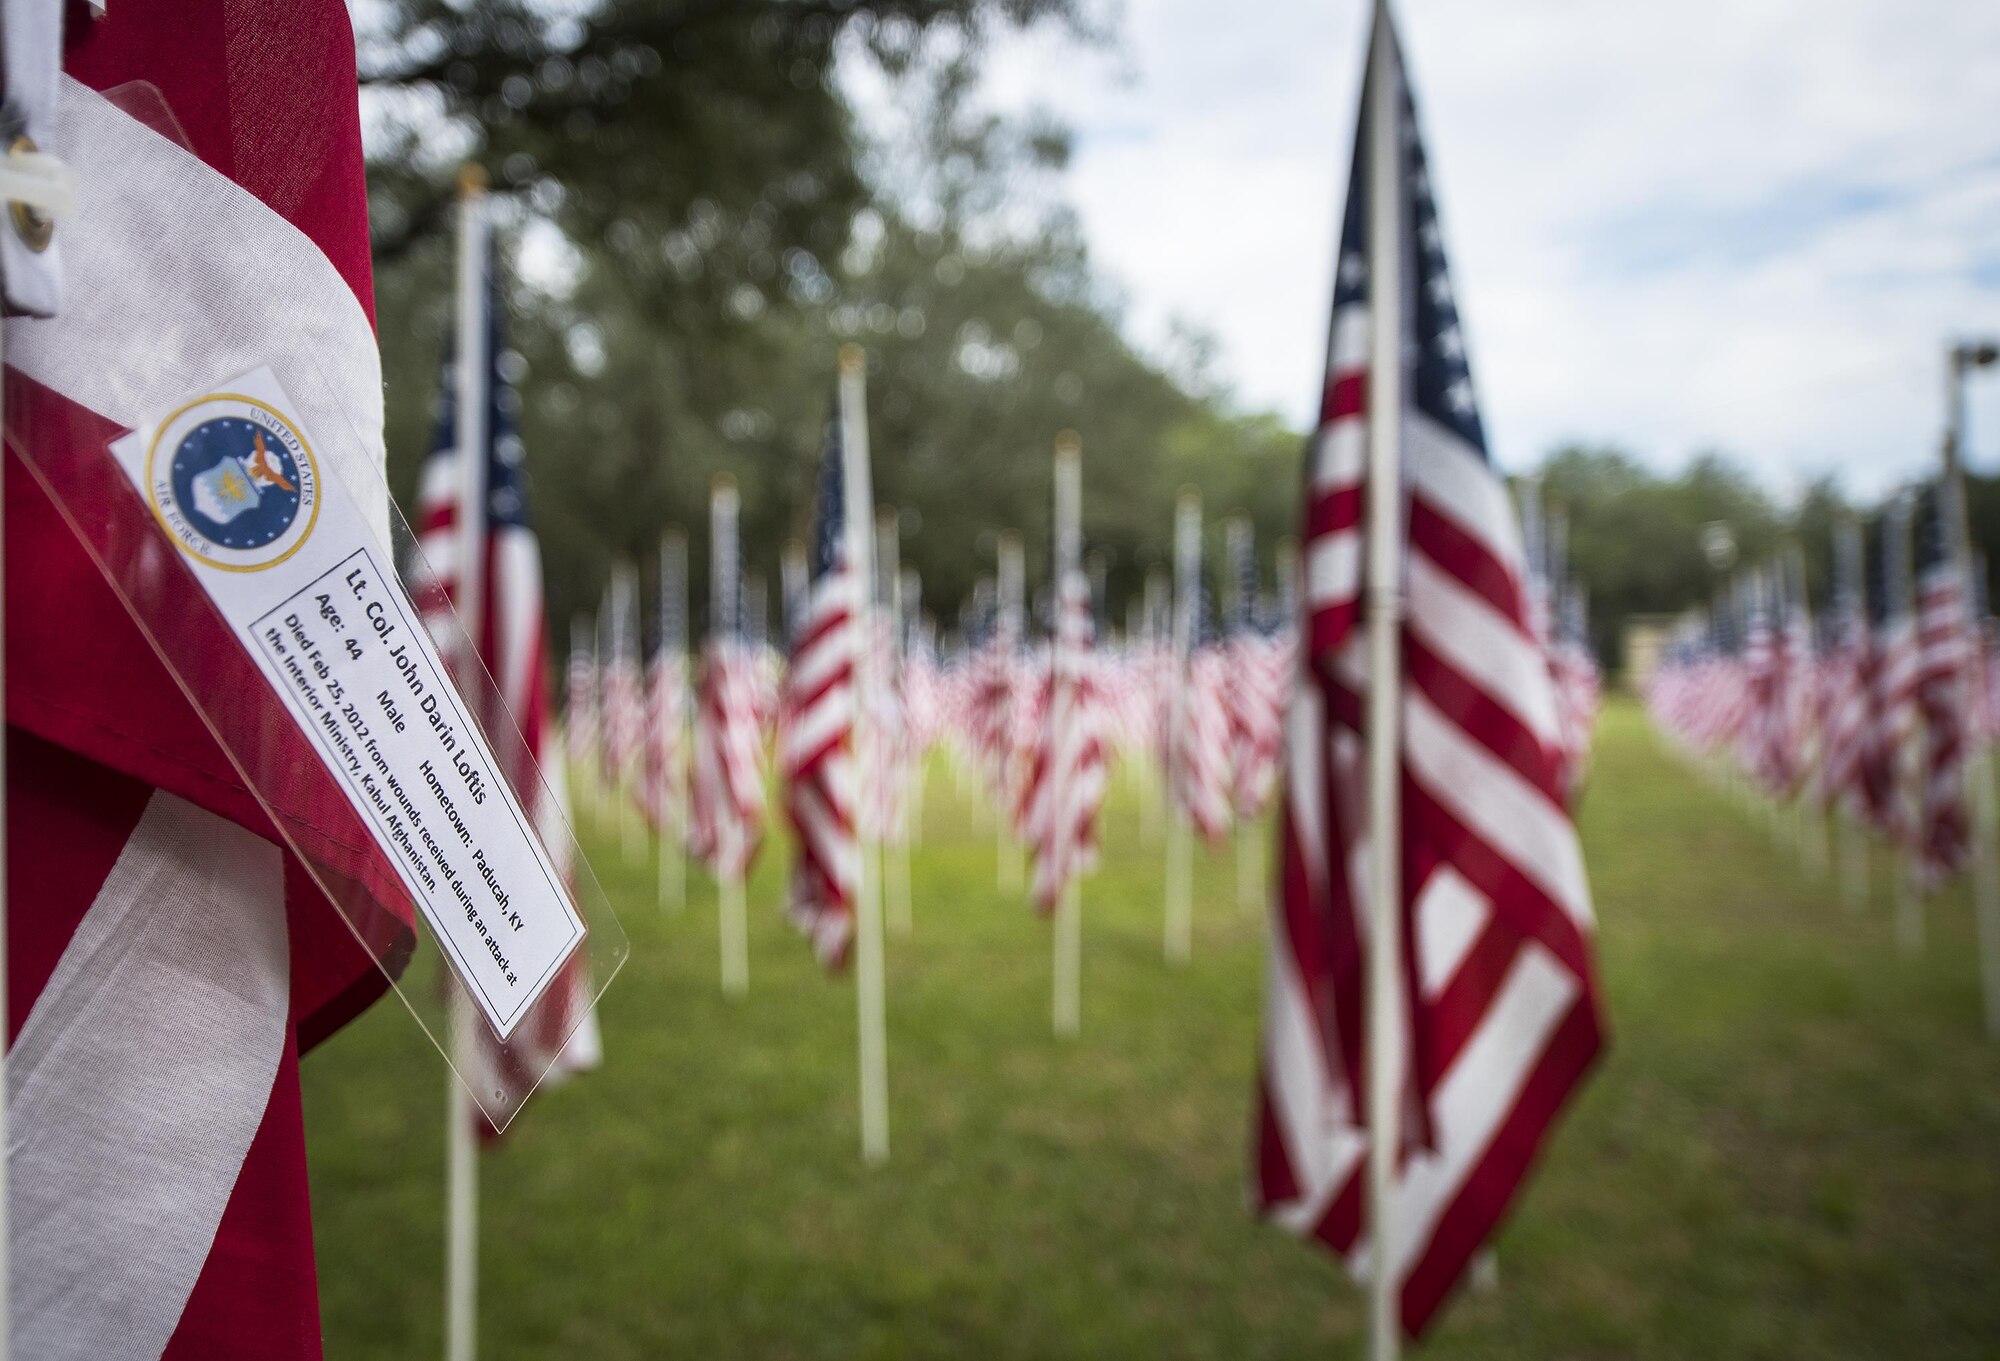 Lt. Col. John Loftis' name was attached to one of the flags set up on the Field of Valor display in Niceville, Fla. Sept. 12. The display features 13 rows of 27 flags and one extra to create the field. Names of recently fallen military members, including 10 Airmen, adorn each of the approximately 352 American flags. The Field will be on display through Sept. 17 at the Mullet Festival grounds and is free to the public. (U.S. Air Force photo/Samuel King Jr.) 